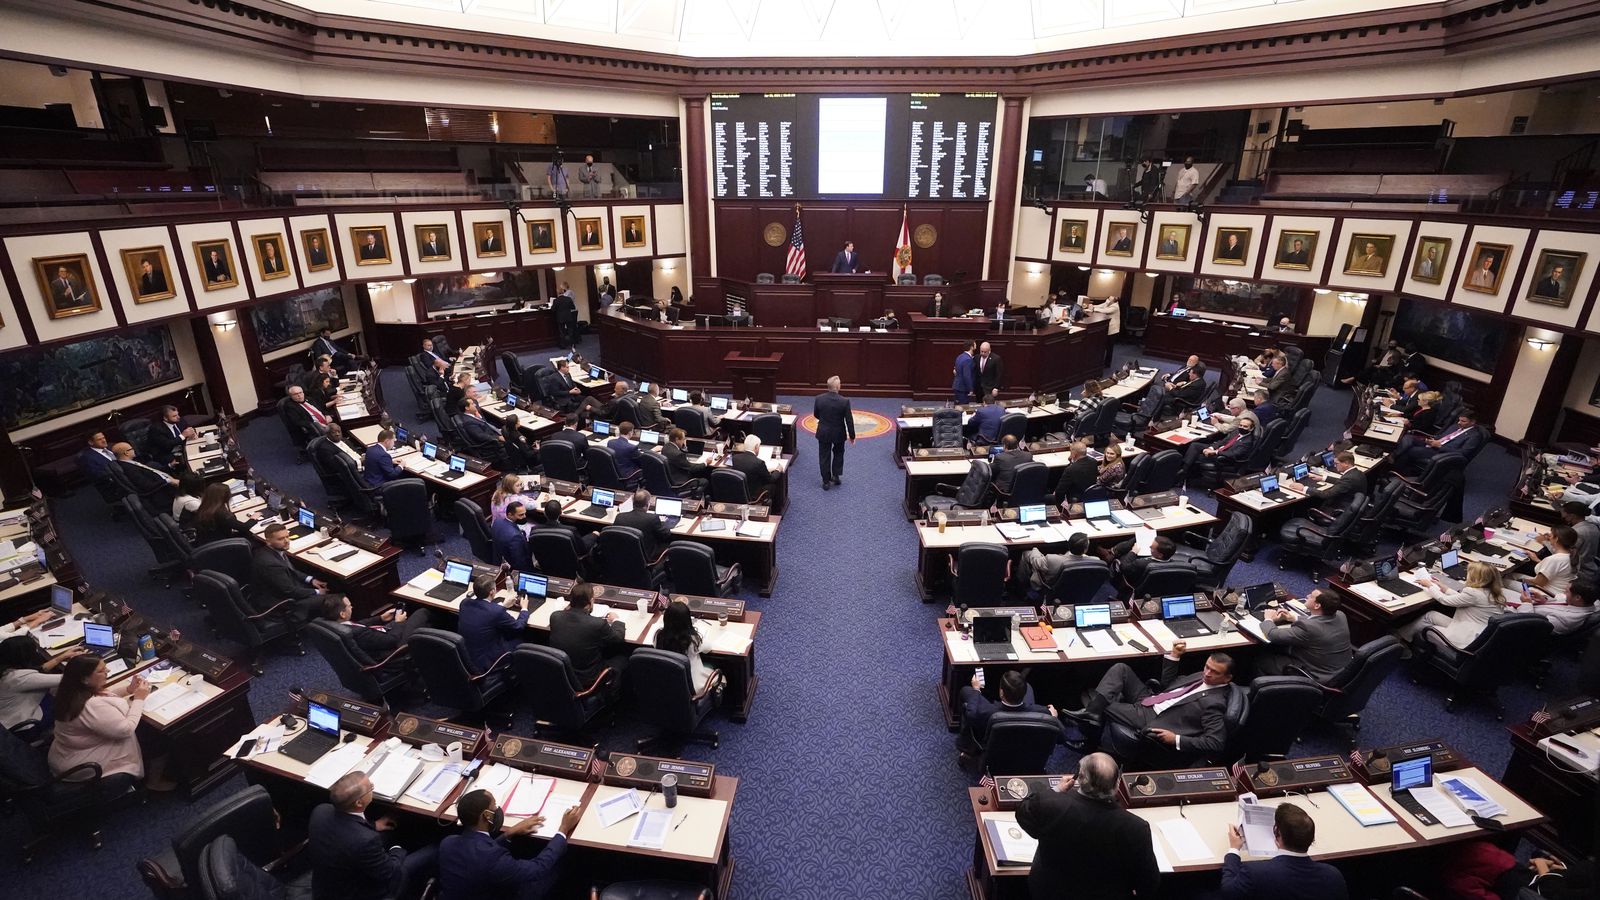 FLORIDA SENATE PASSES COVID-19 BUSINESS PROTECTION BILL NEGOTIATED WITH THE HOUSE OF REPRESENTATIVES